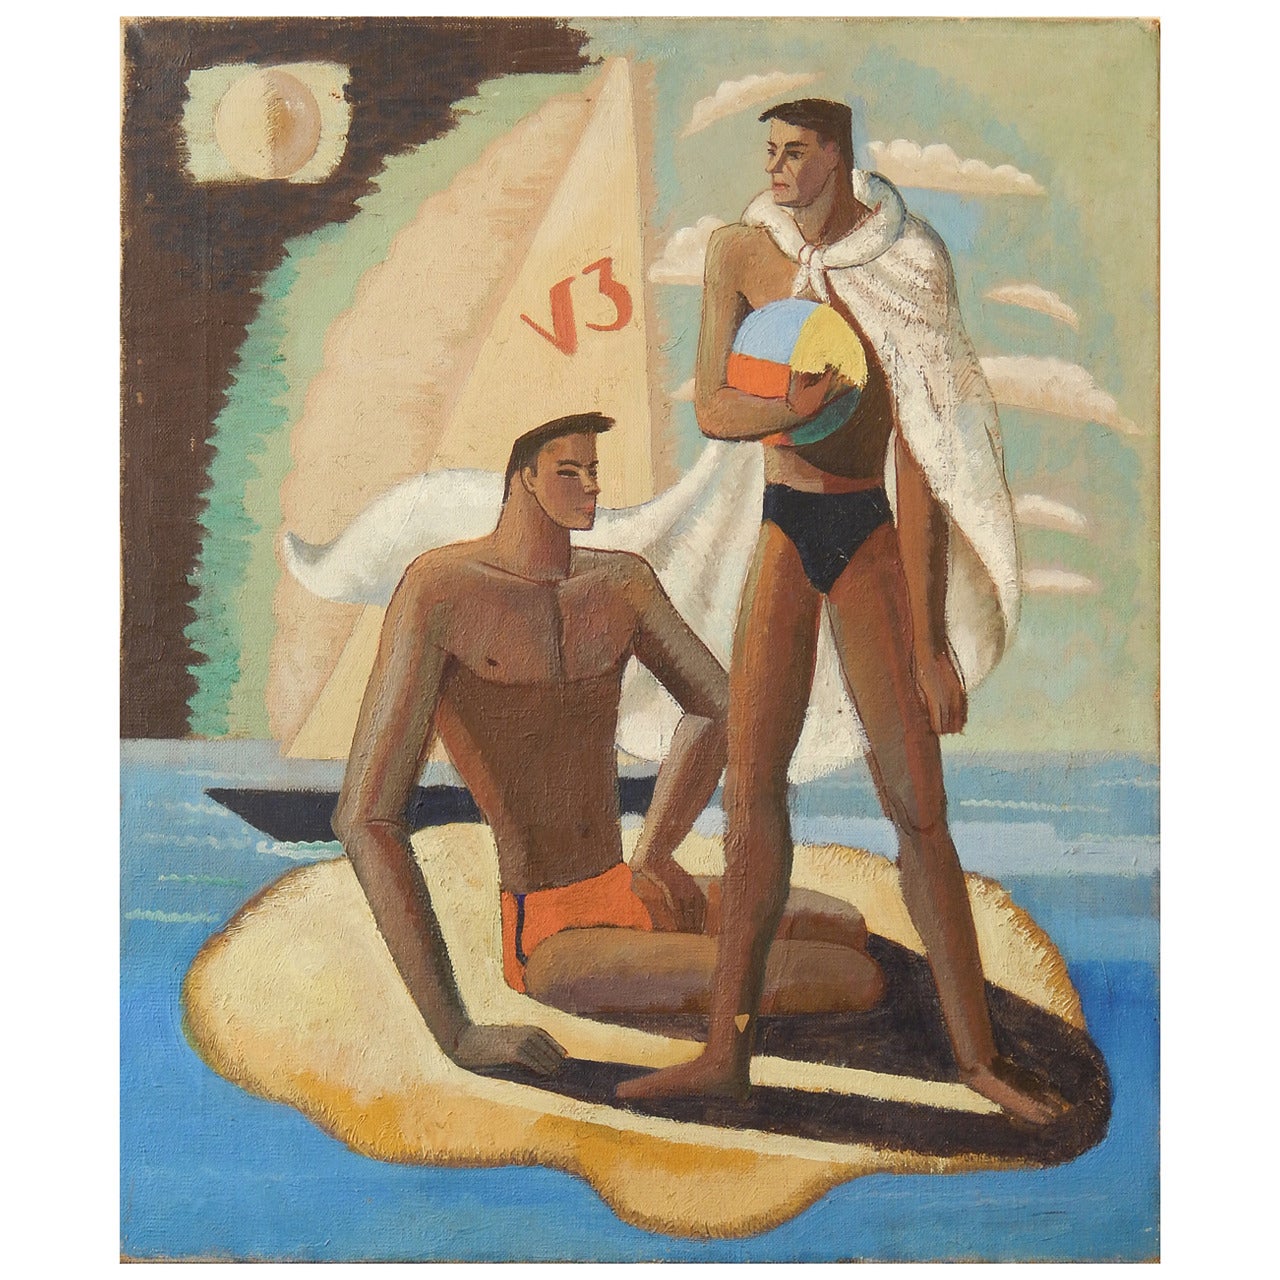 "The Swimmers, " Superb Art Deco Painting Influenced by Cubism, 1934